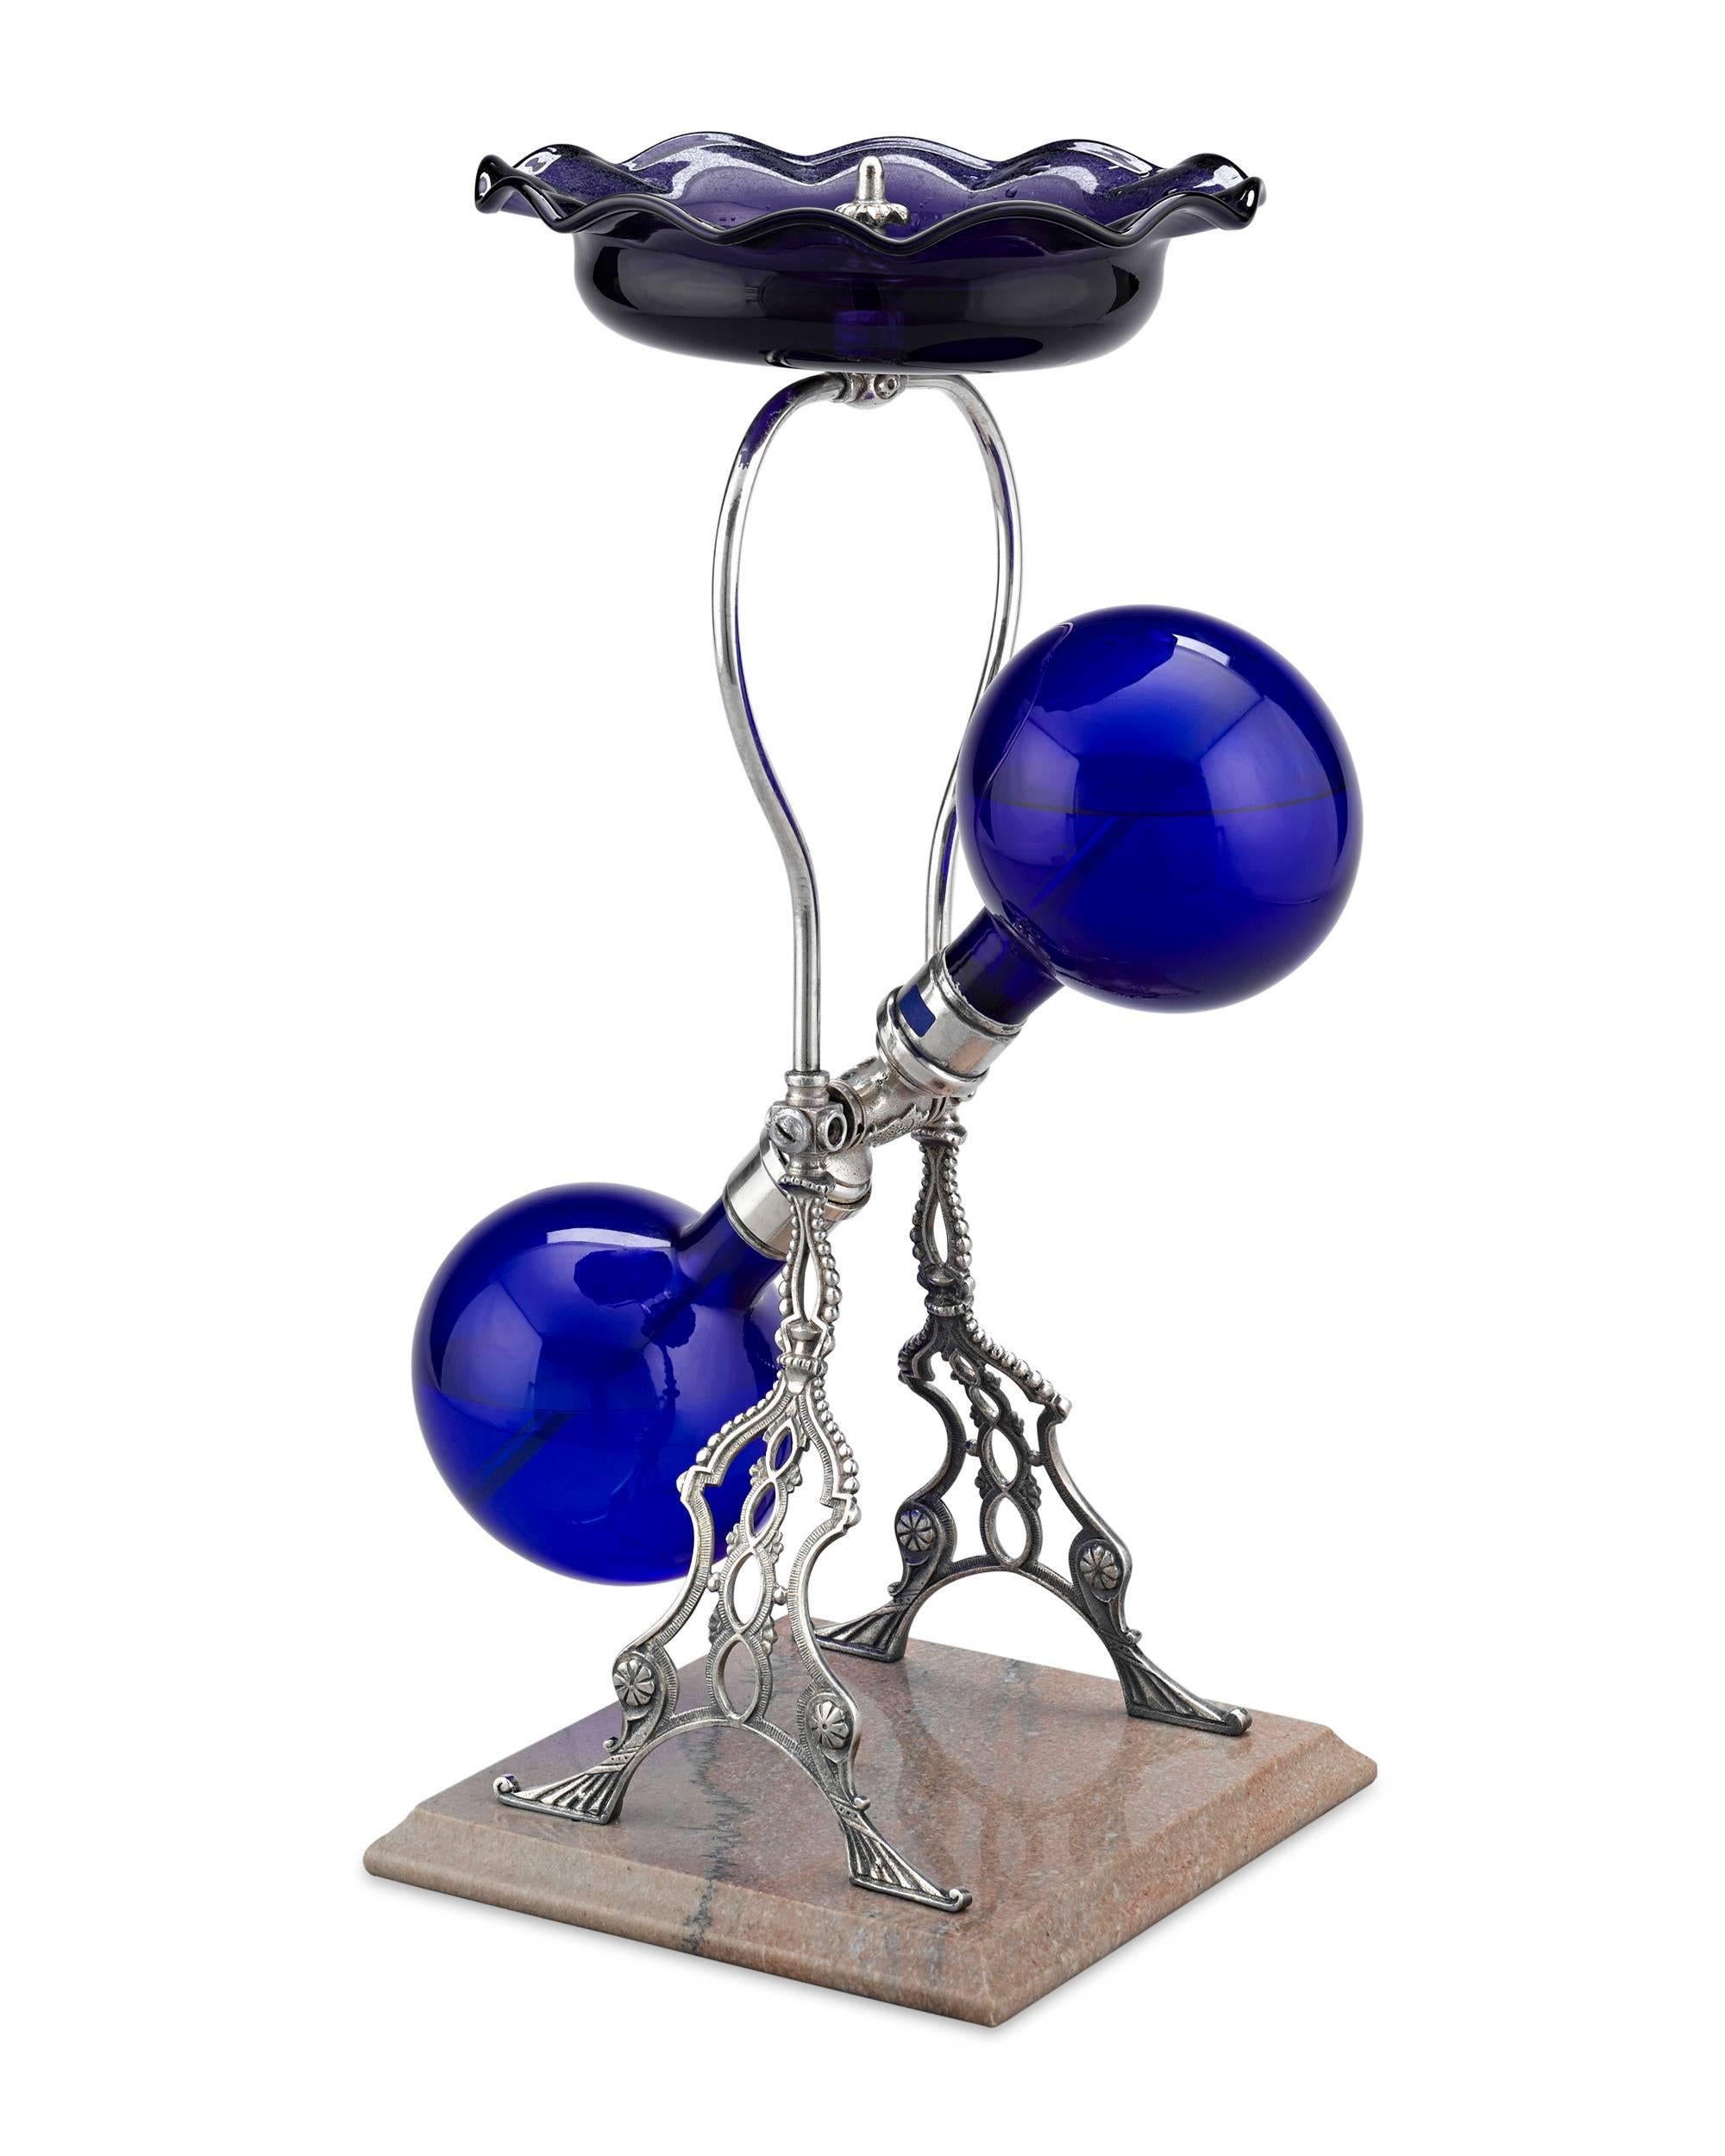 A fascinating and exquisite luxury of Victorian America, this incredible Automatic Cobalt Fountain was created by James Walker Tufts of Boston and was used to diffuse perfumed water to create an olfactory and visually-pleasing experience.

With no